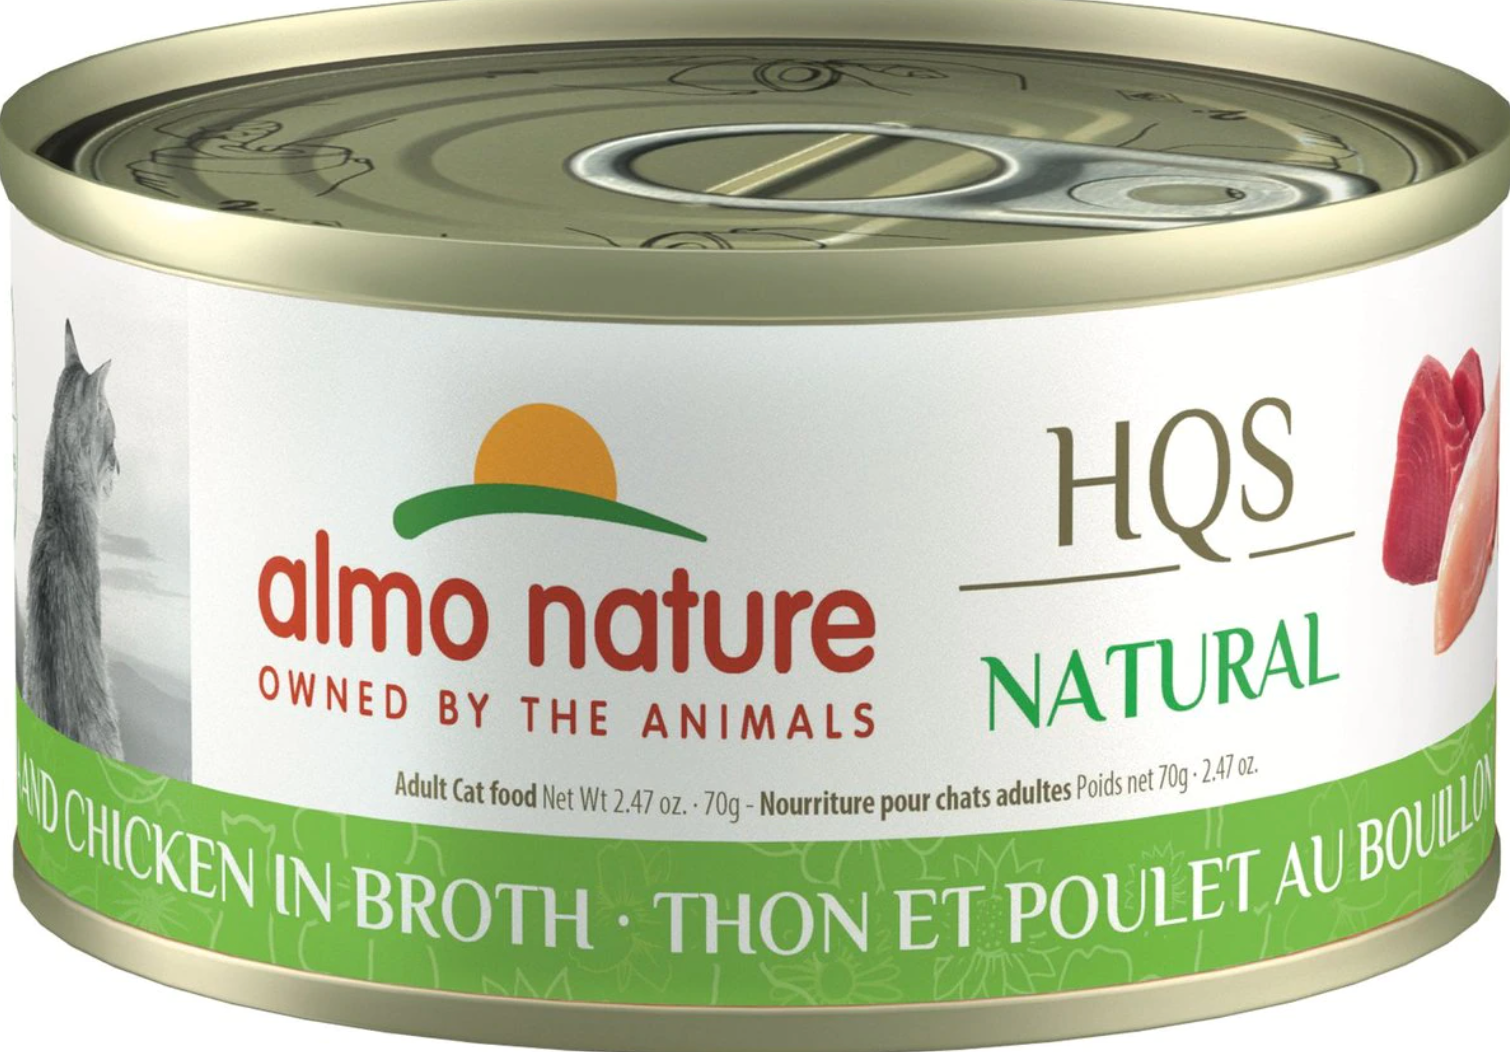 Almo Nature HQS Natural Tuna & Chicken in Broth Grain-Free Canned Cat Food, 2.47-oz, case of 24